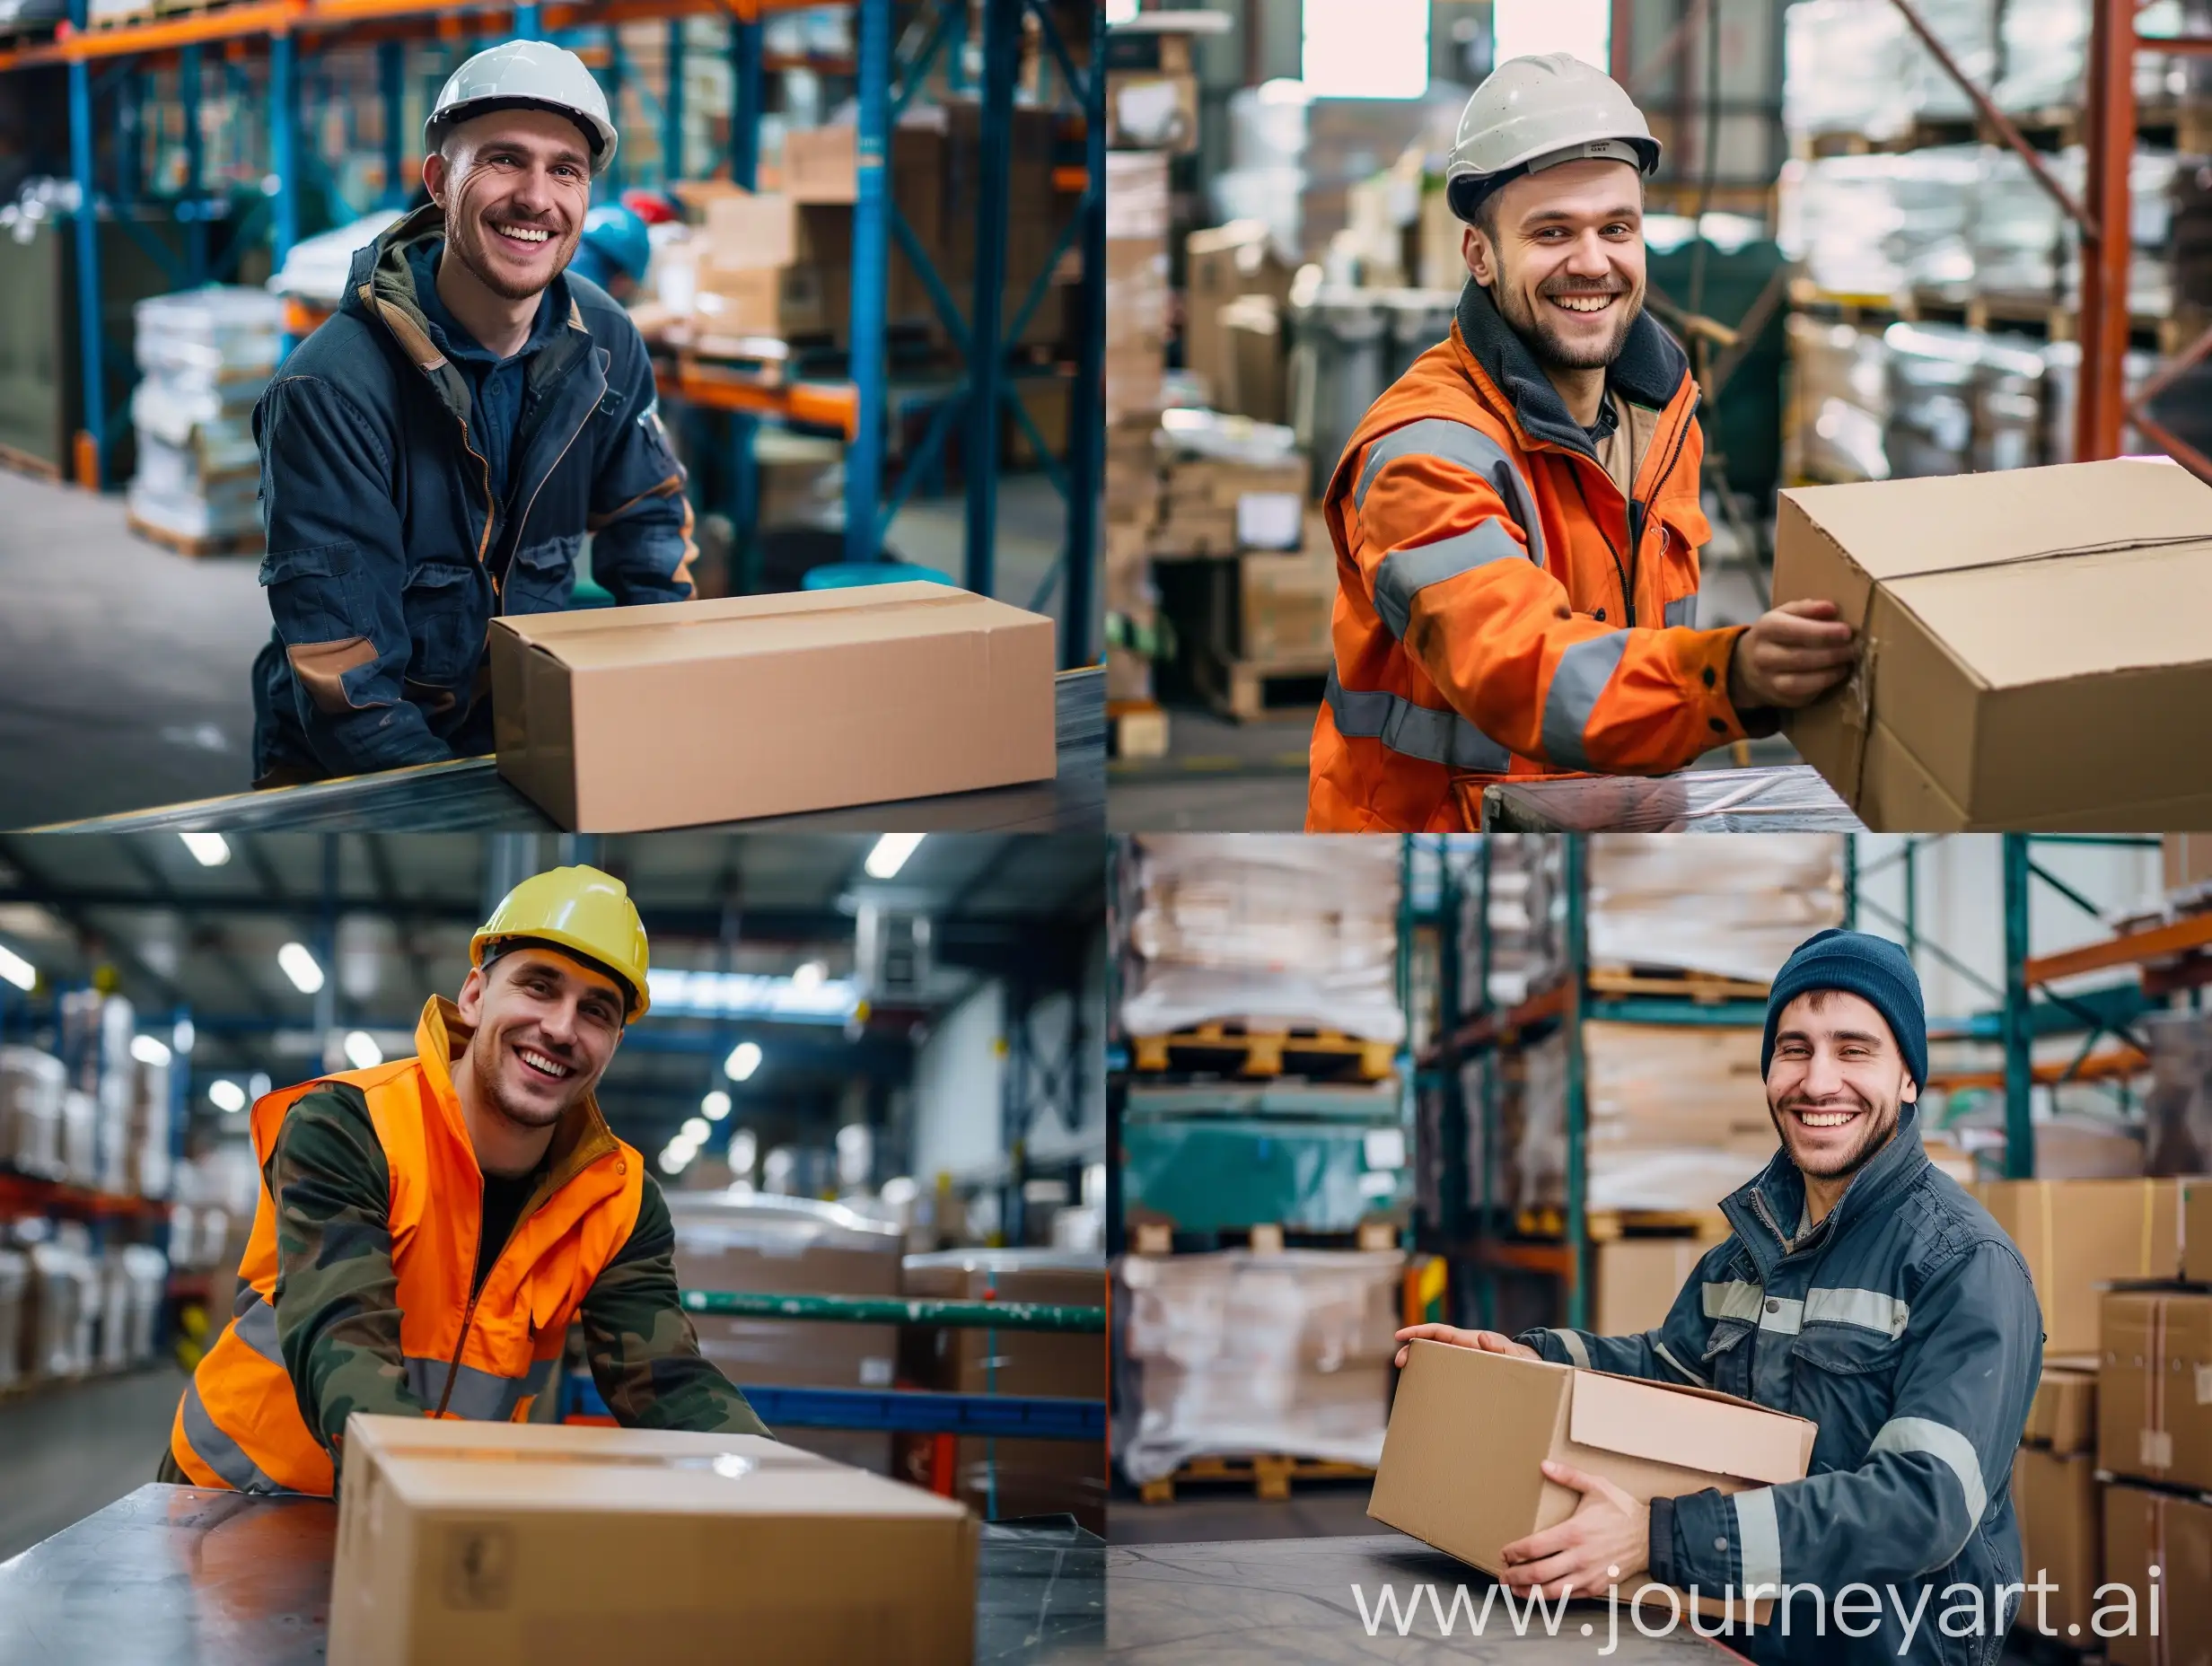 Smiling-Slavic-Warehouse-Worker-Places-Box-on-Table